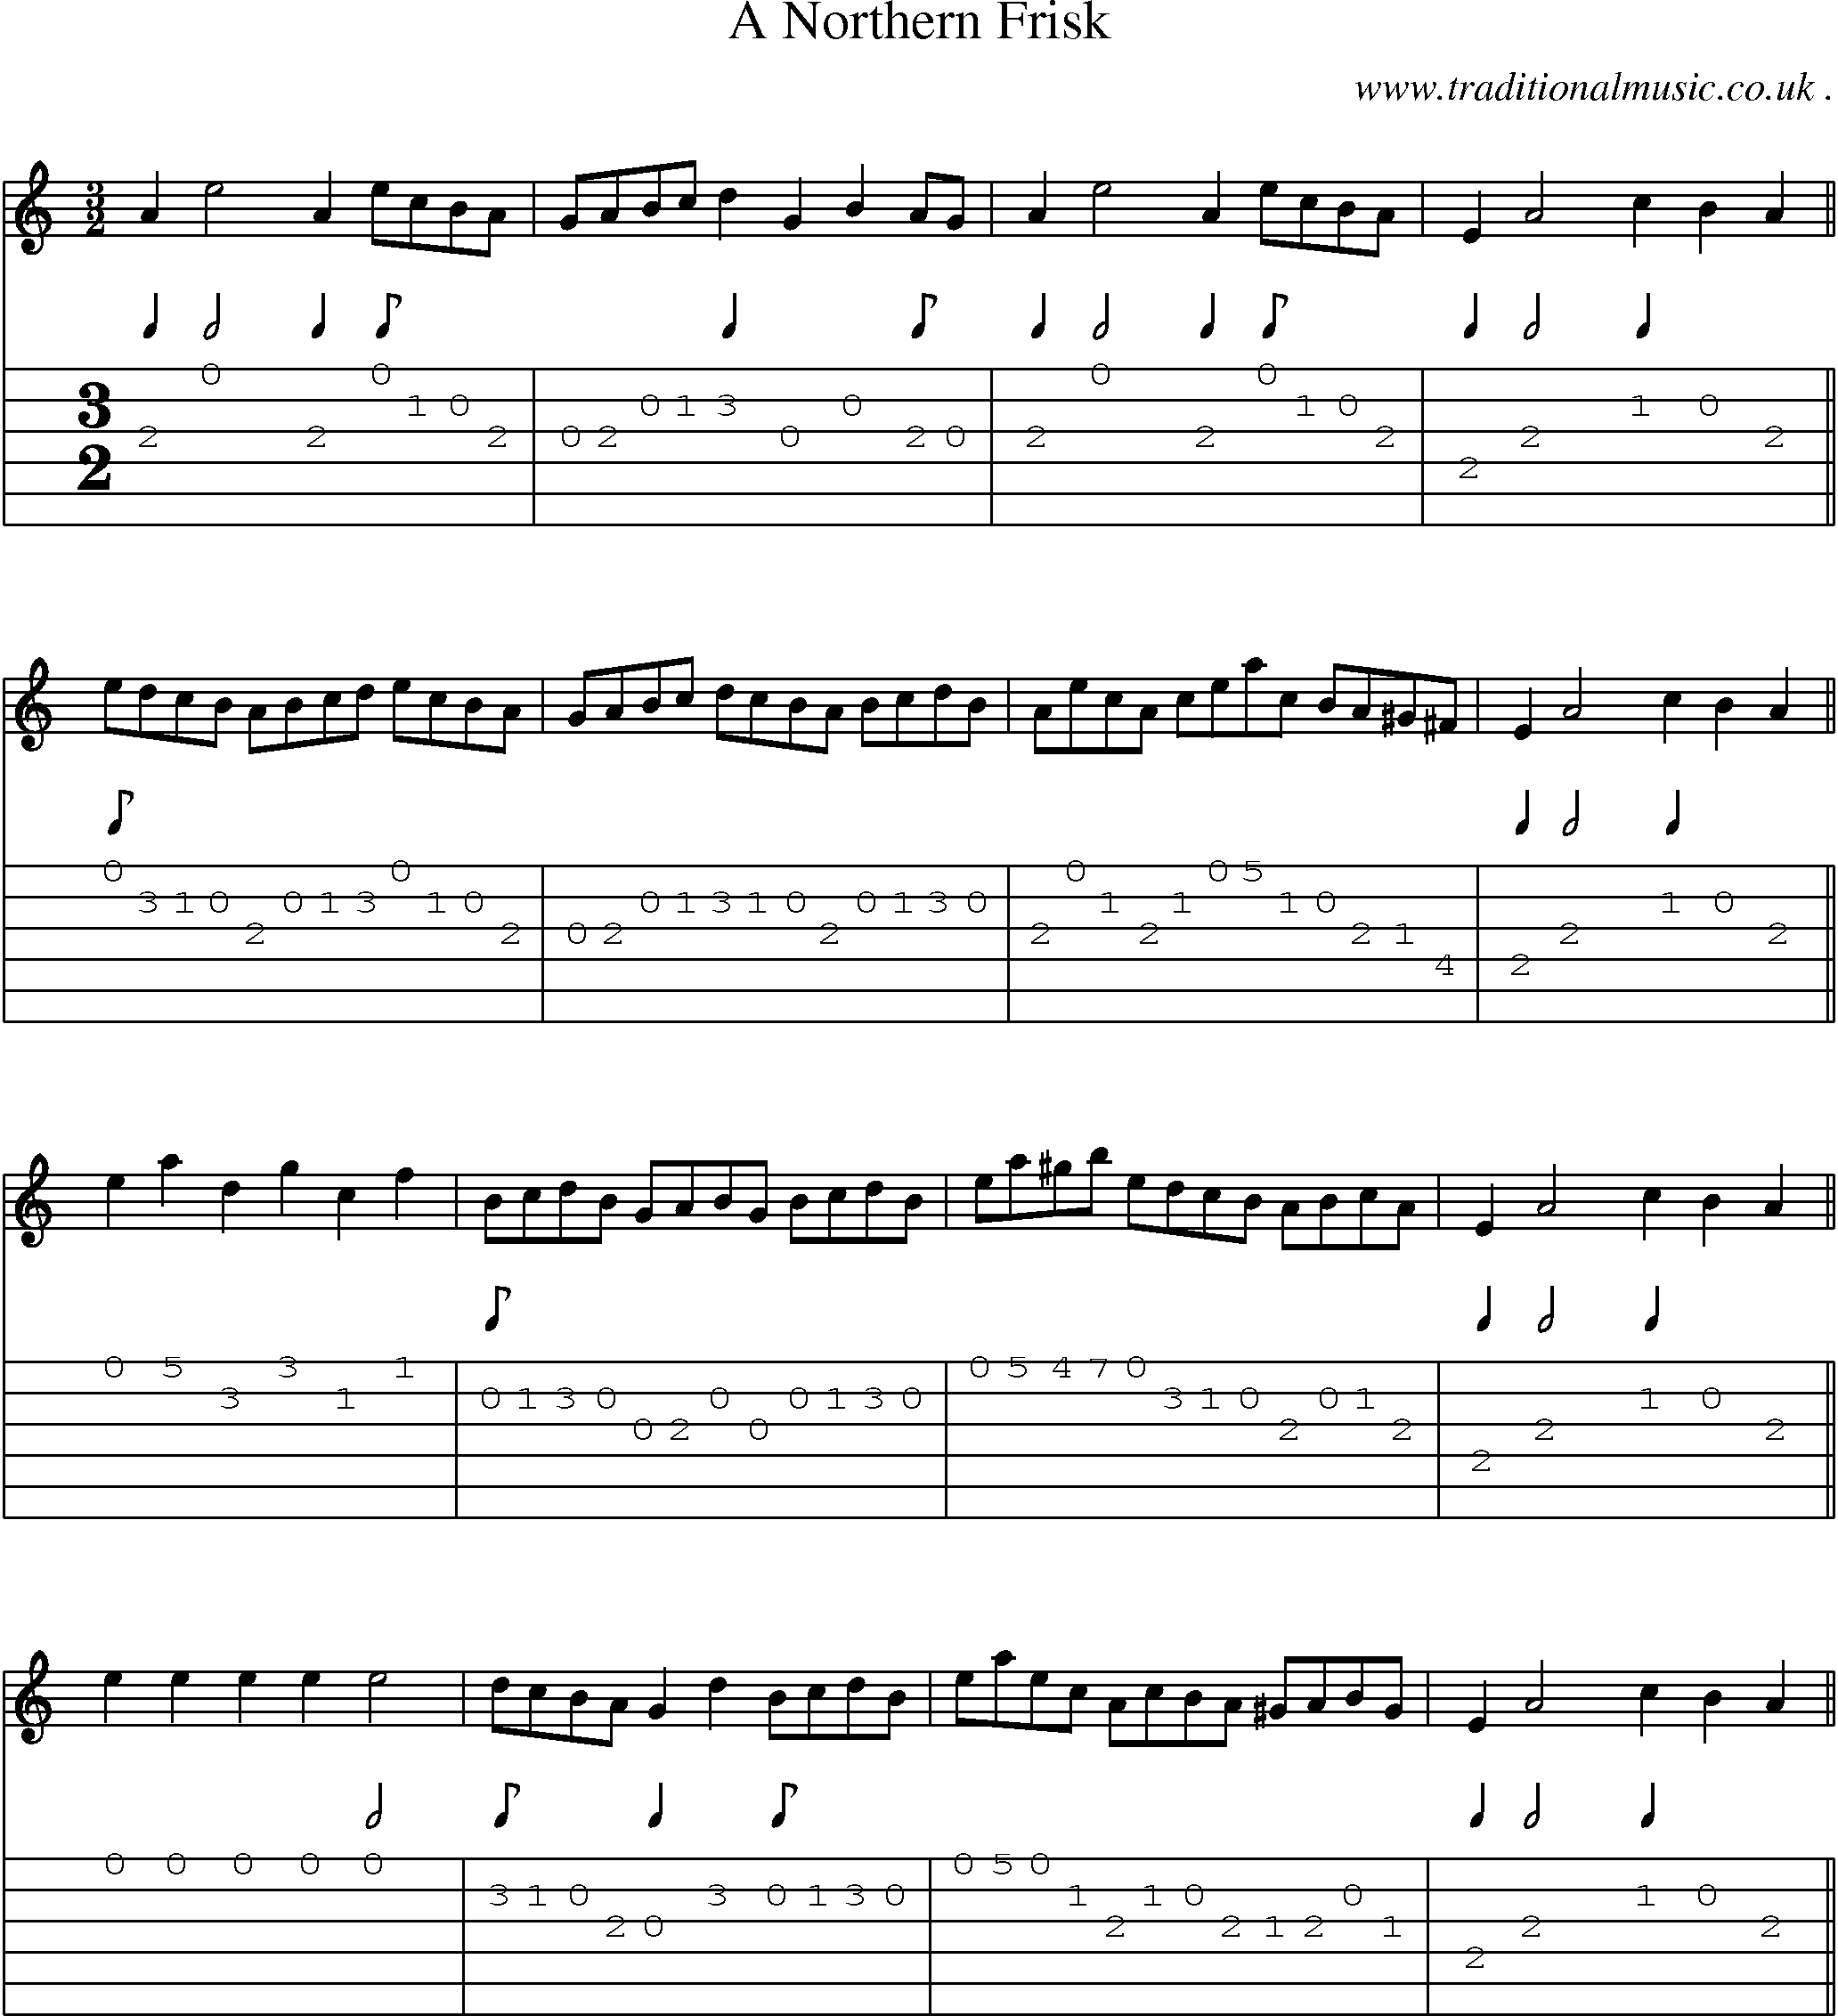 Sheet-Music and Guitar Tabs for A Northern Frisk